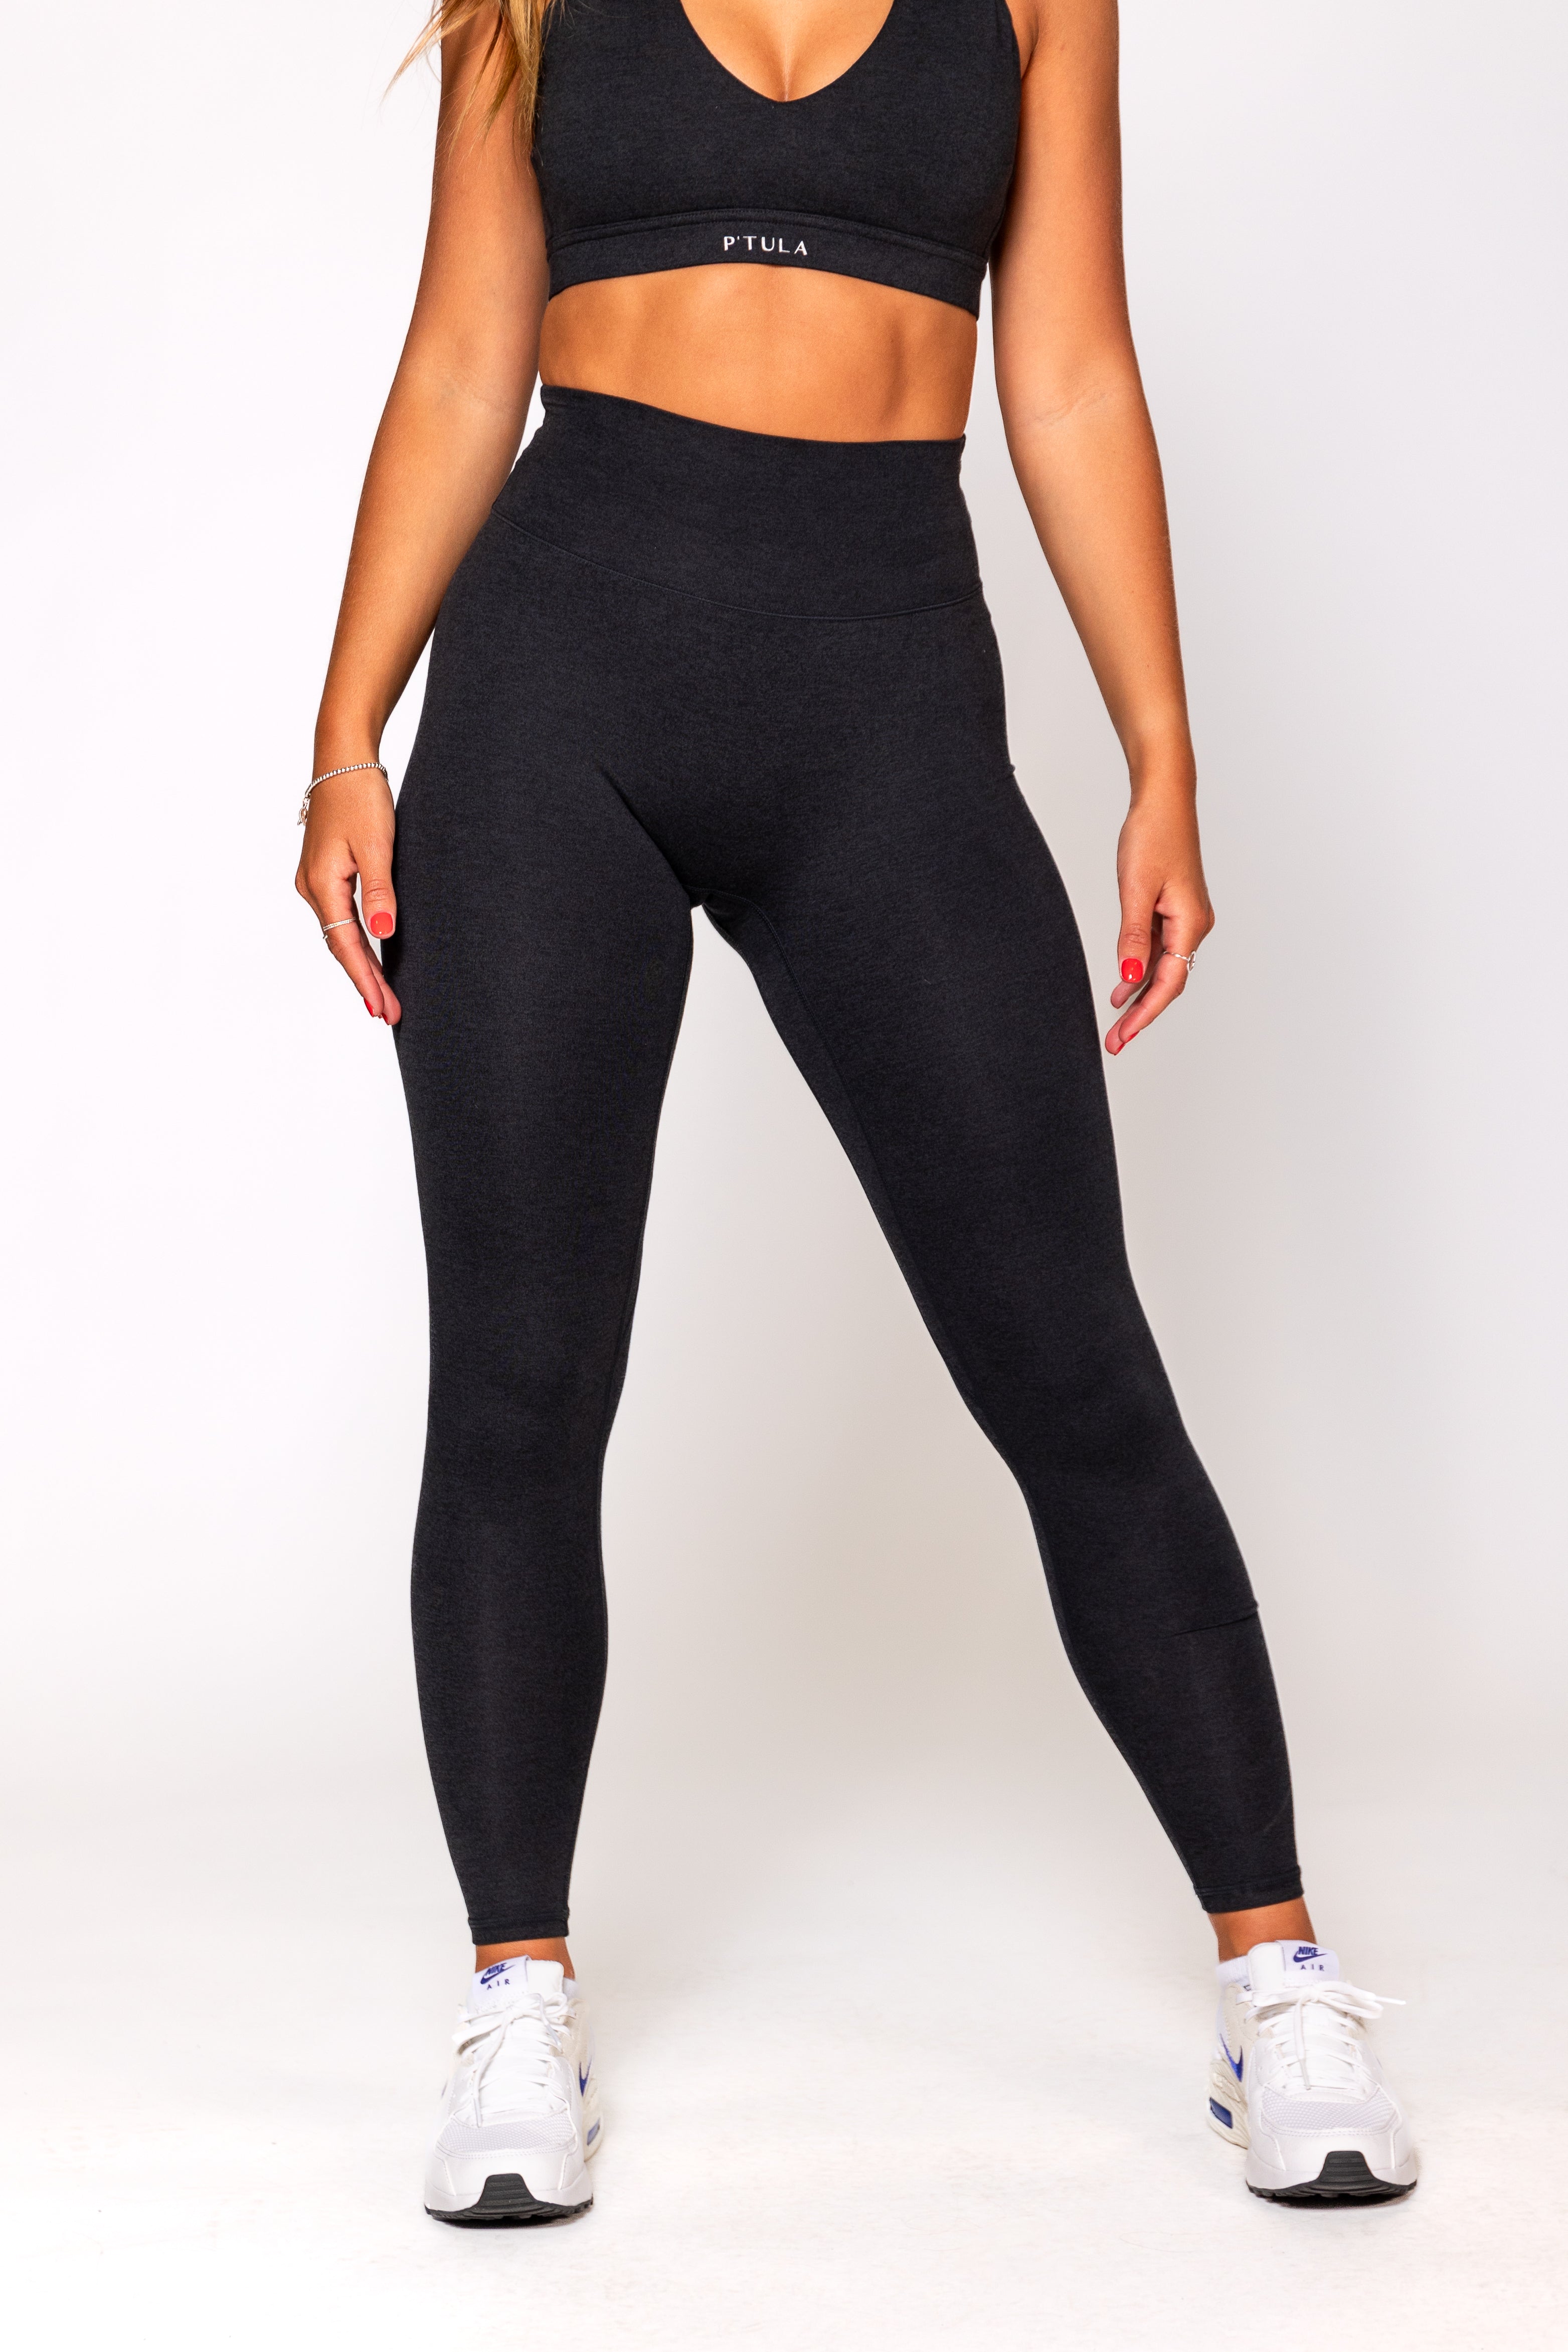 P'tula Review  Leggings and Sports Bra 